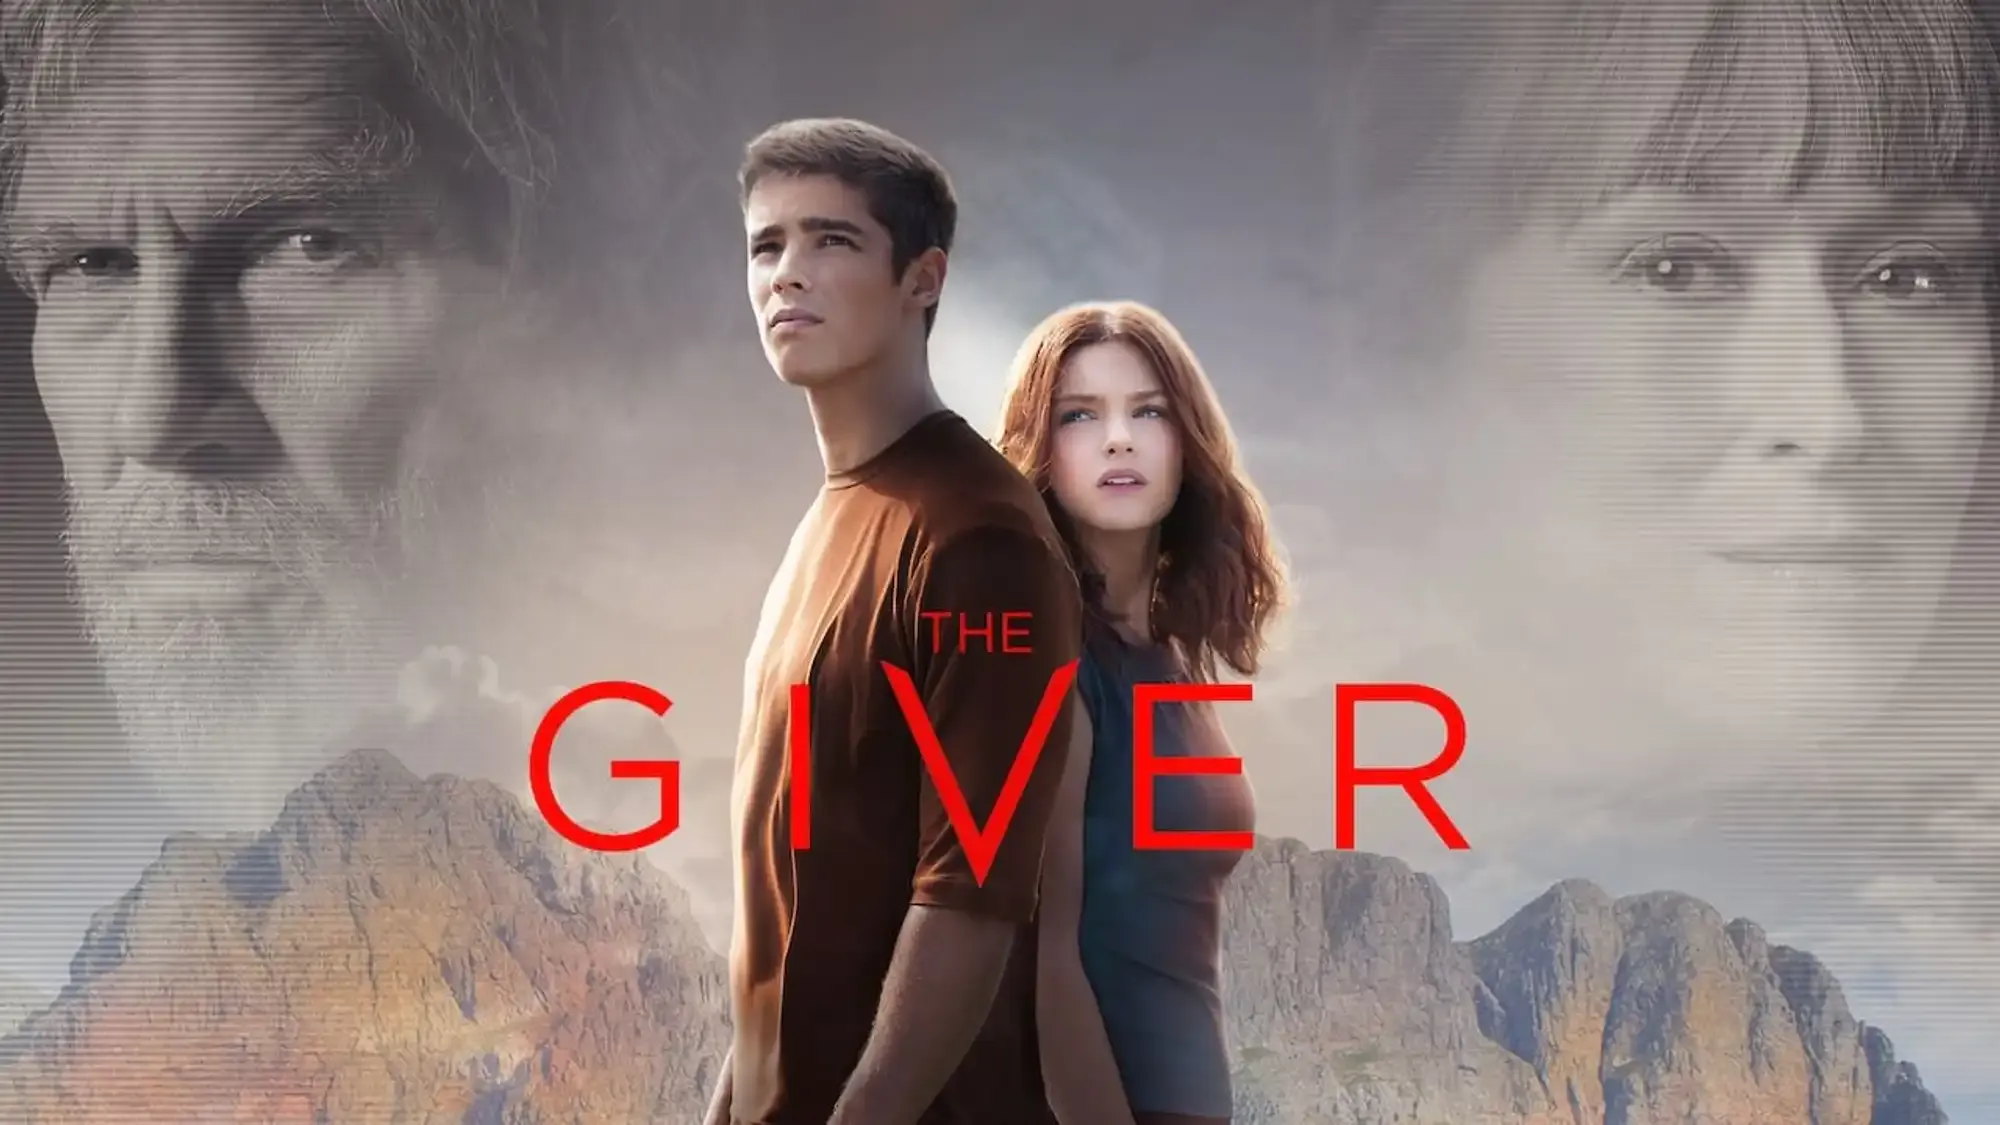 The Giver movie review